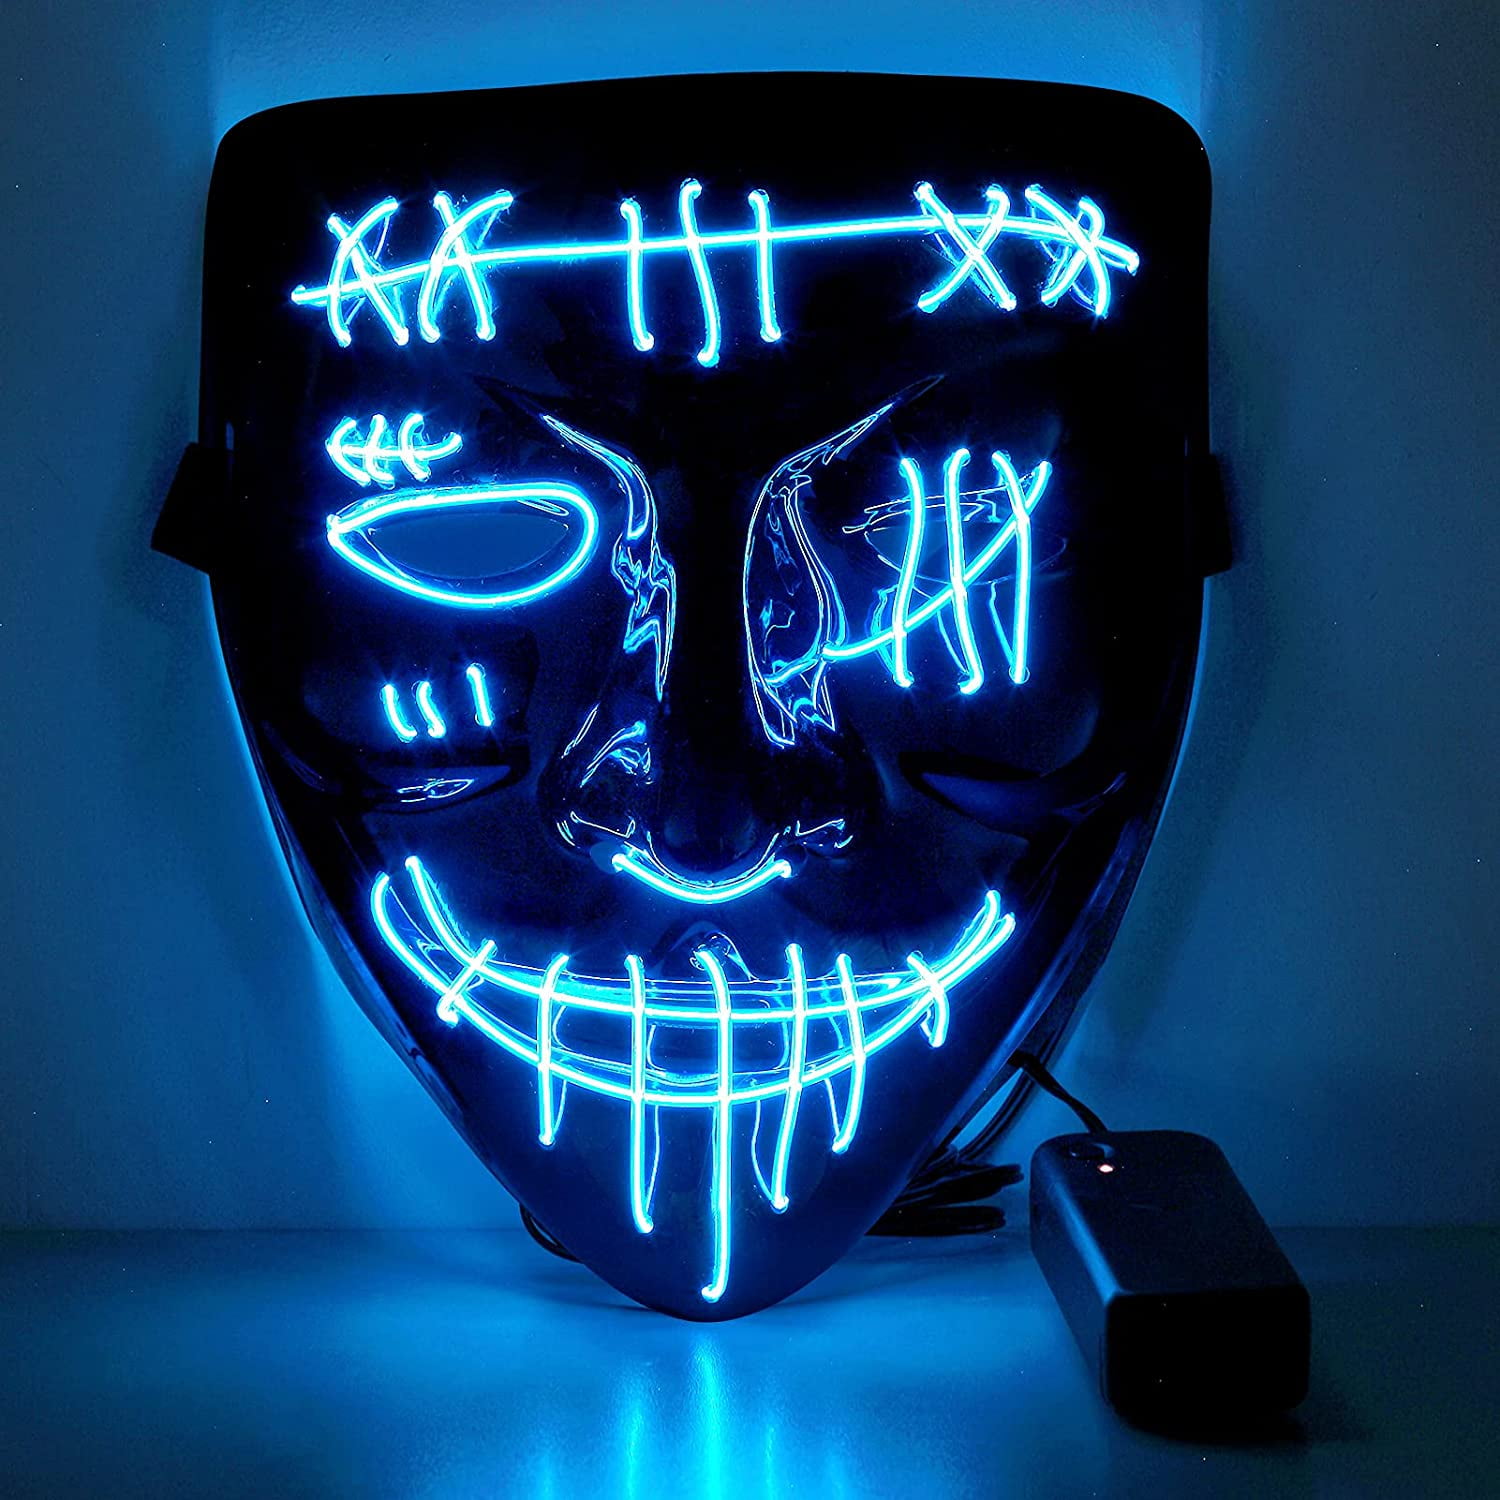 LED Light Up Mask, Led EL Wire Mask for Party Holiday Cosplay Costume - Walmart.com